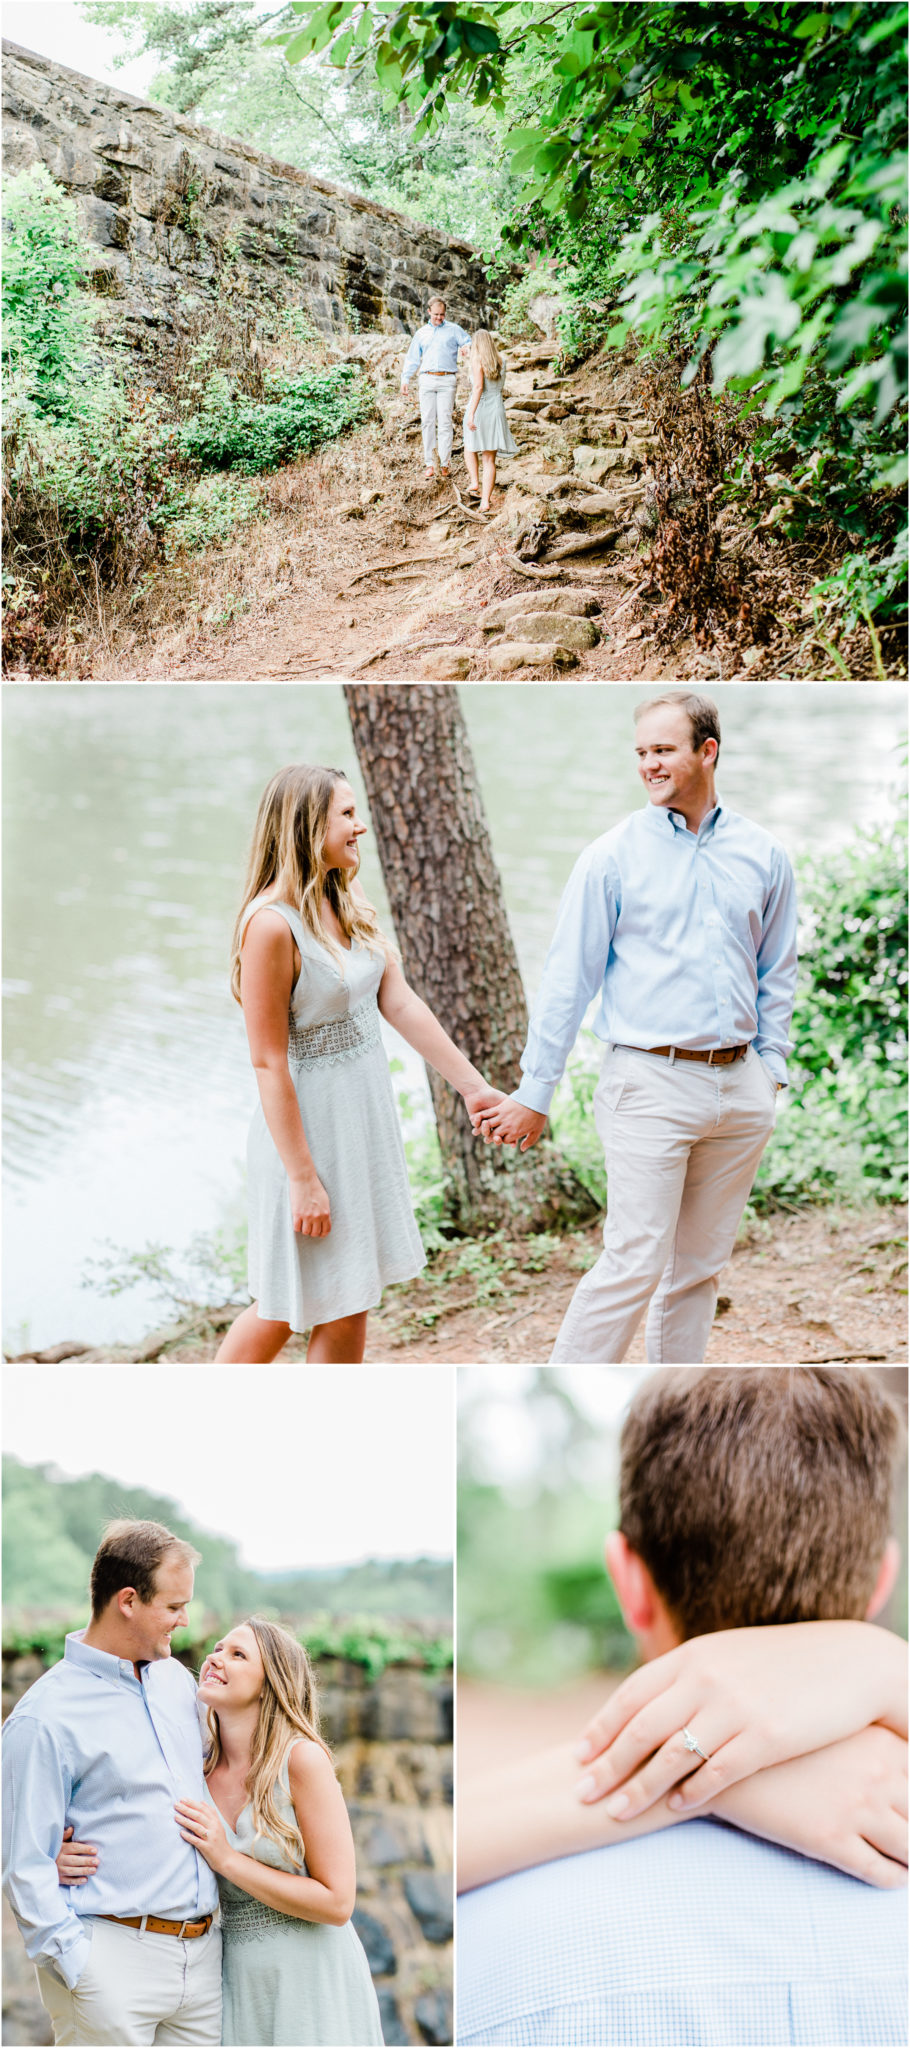 Summer Paris Mountain Engagement Session in Greenville, SC